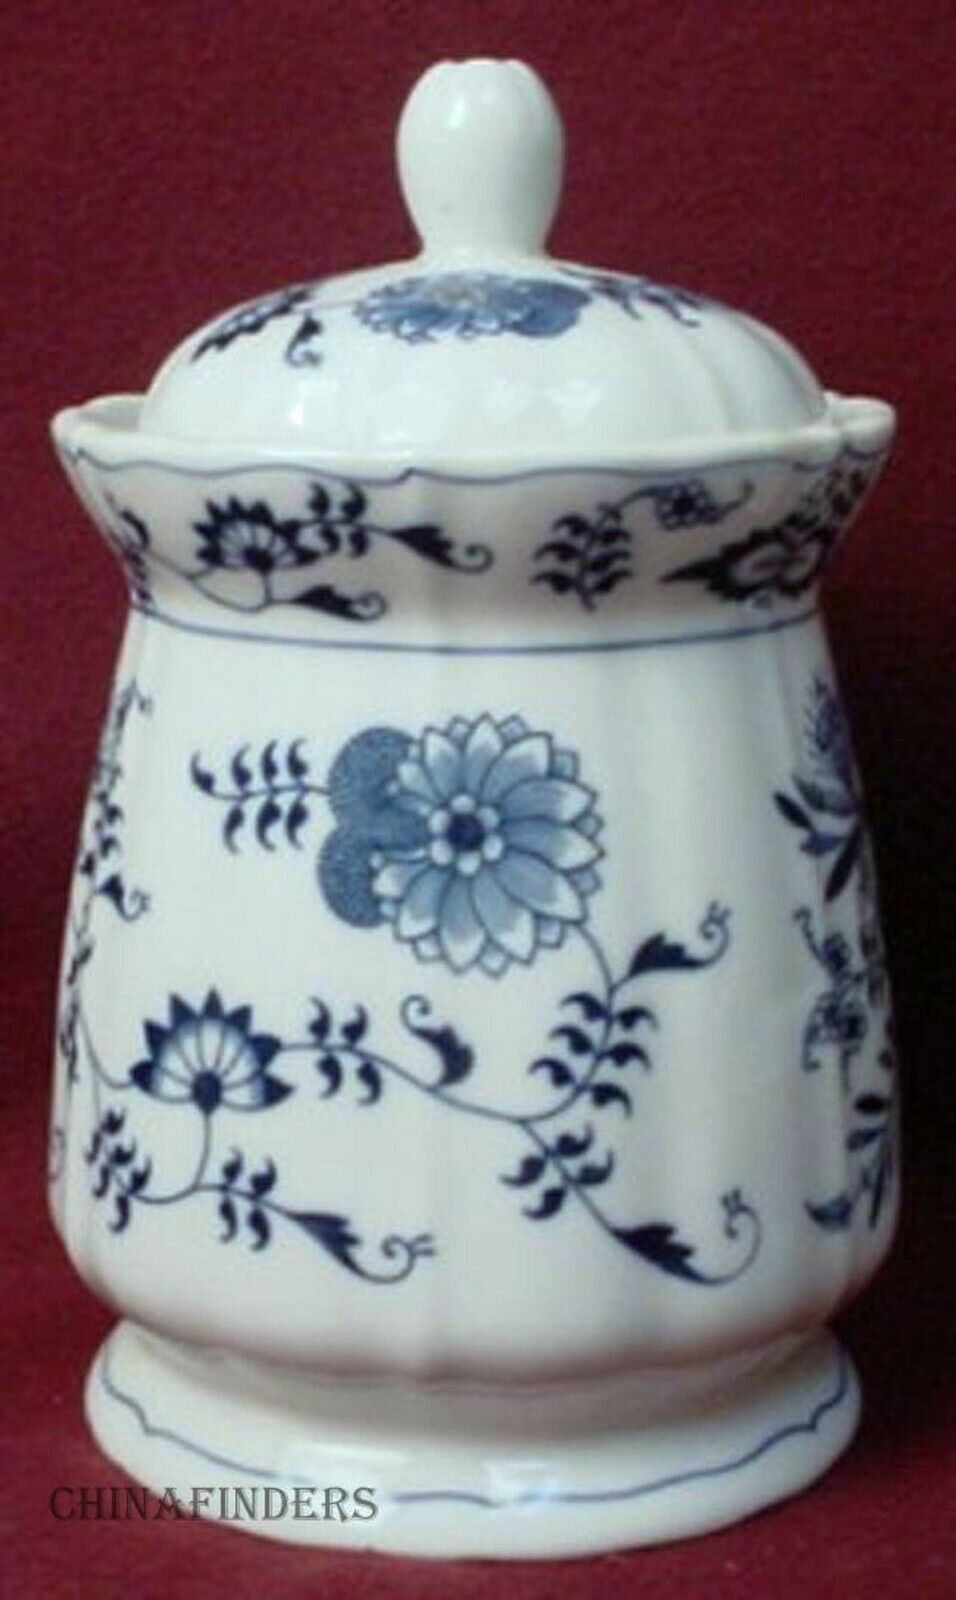 Blue Danube China Footed Candy Or Storage Jar - 6"